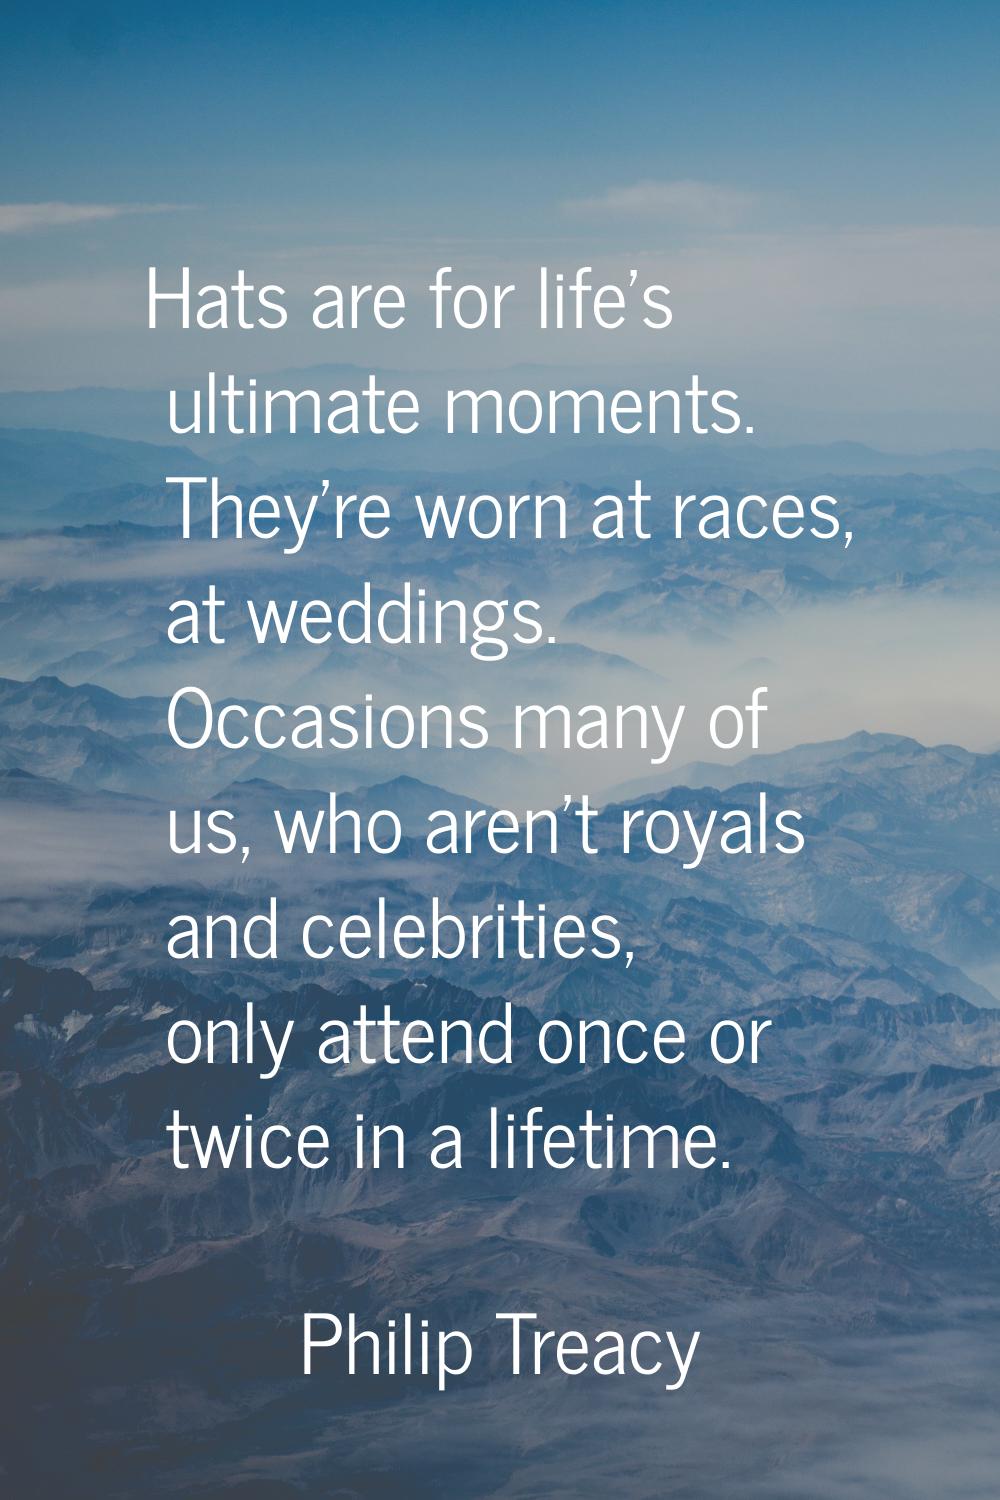 Hats are for life's ultimate moments. They're worn at races, at weddings. Occasions many of us, who